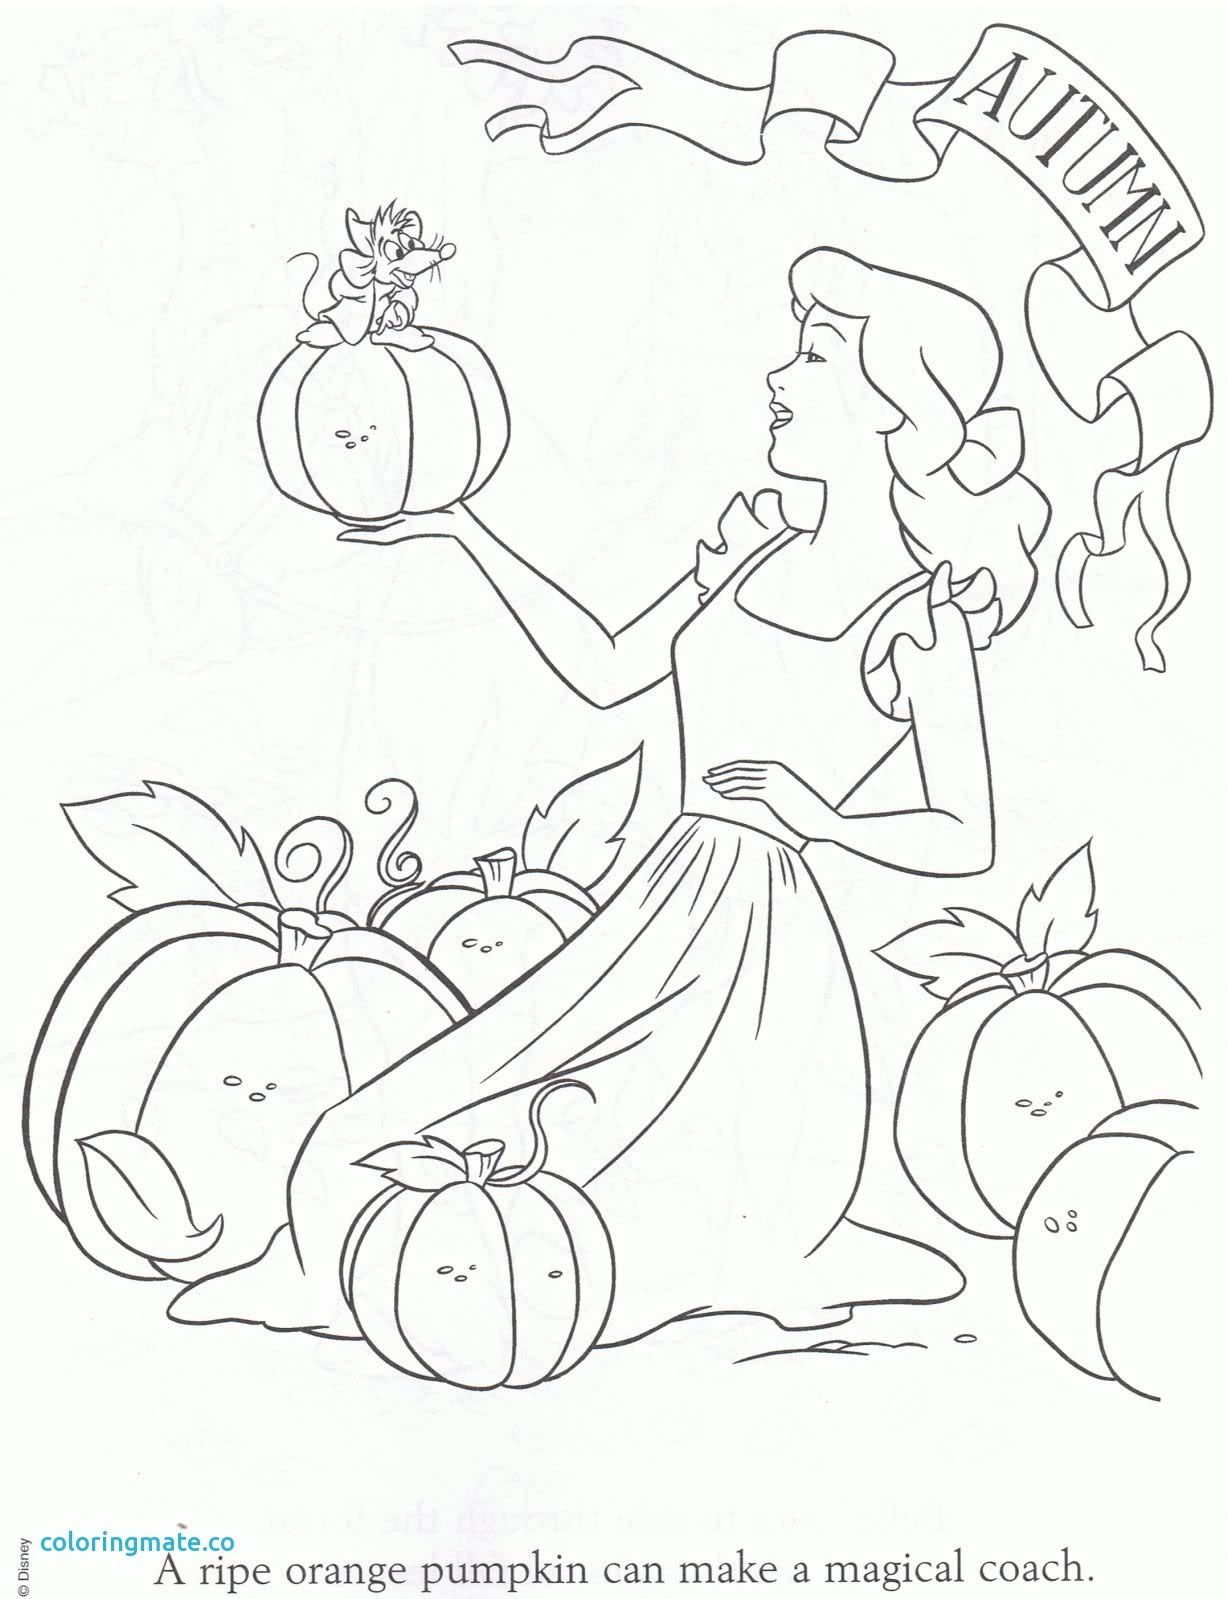 Hipster Girl Coloring Pages at GetColorings.com | Free printable ...